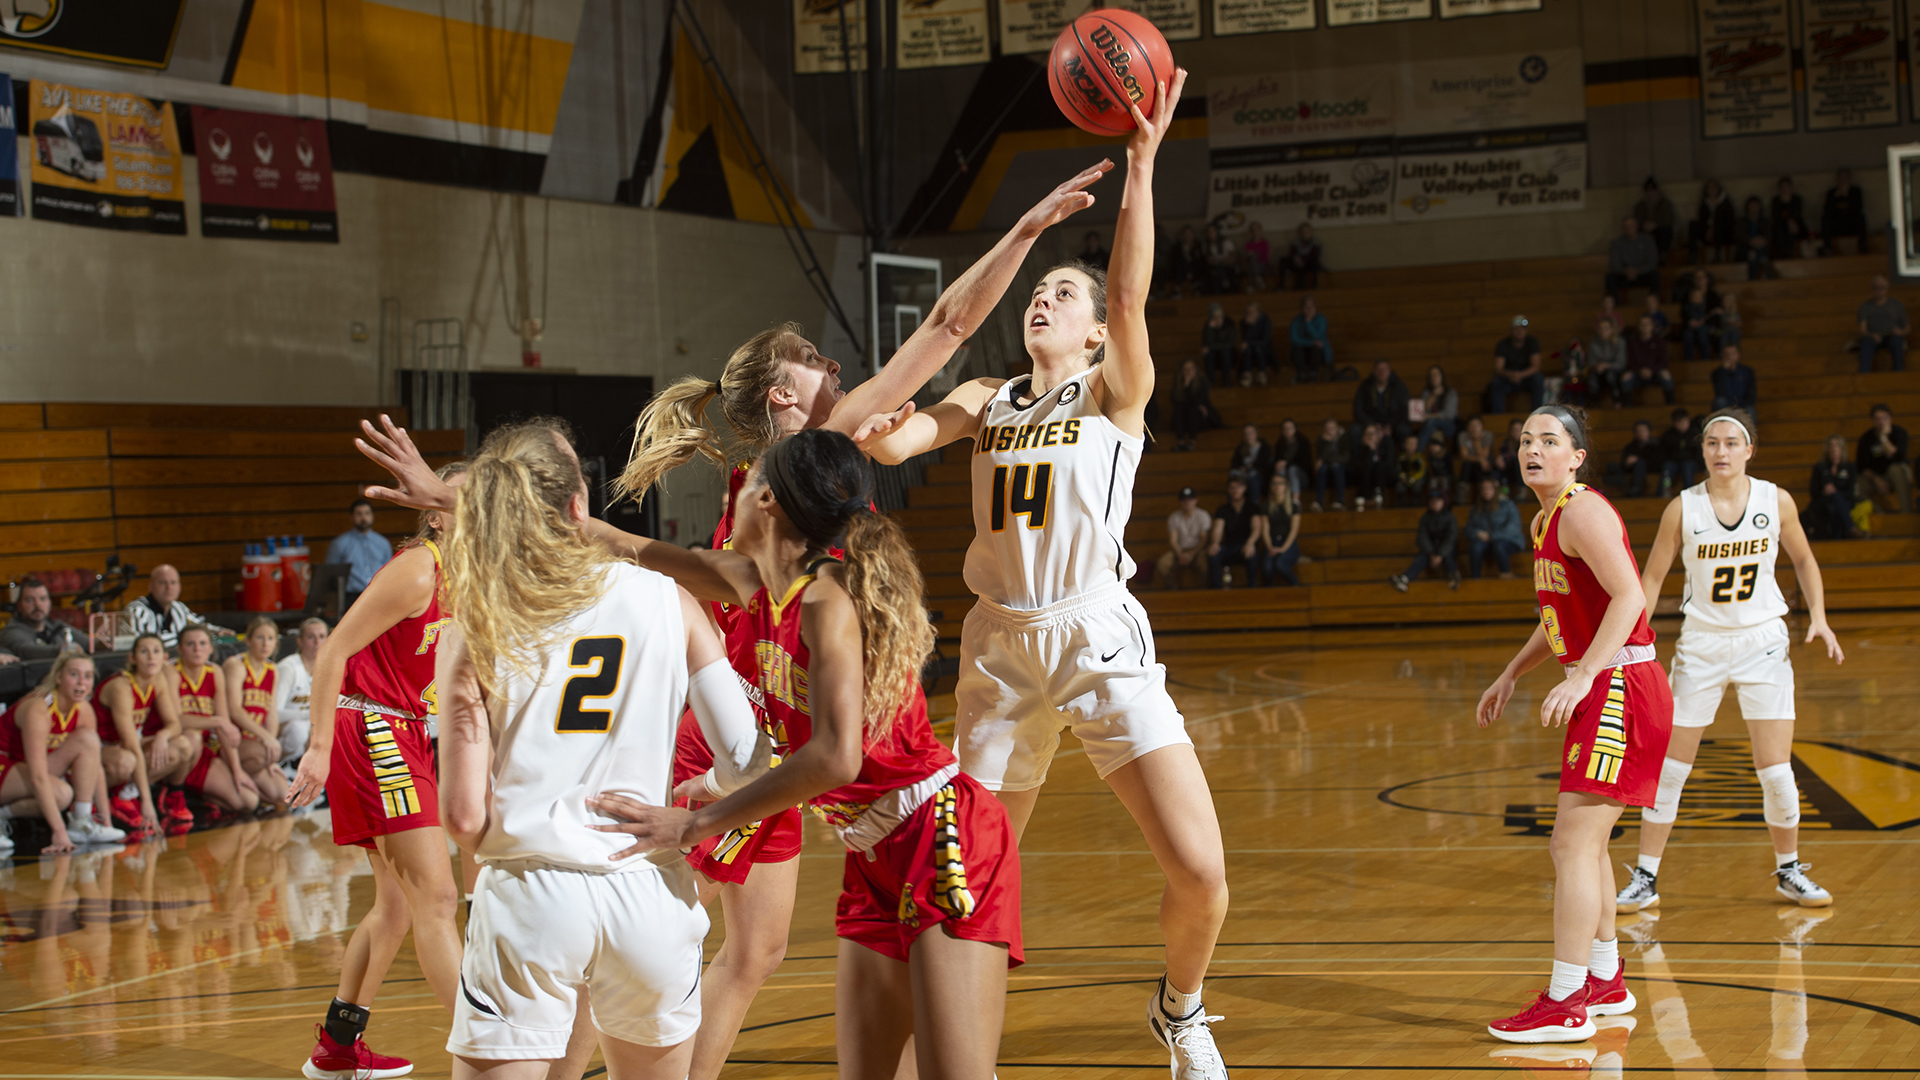 PREVIEW: Huskies host challenging NSIC opponents this week